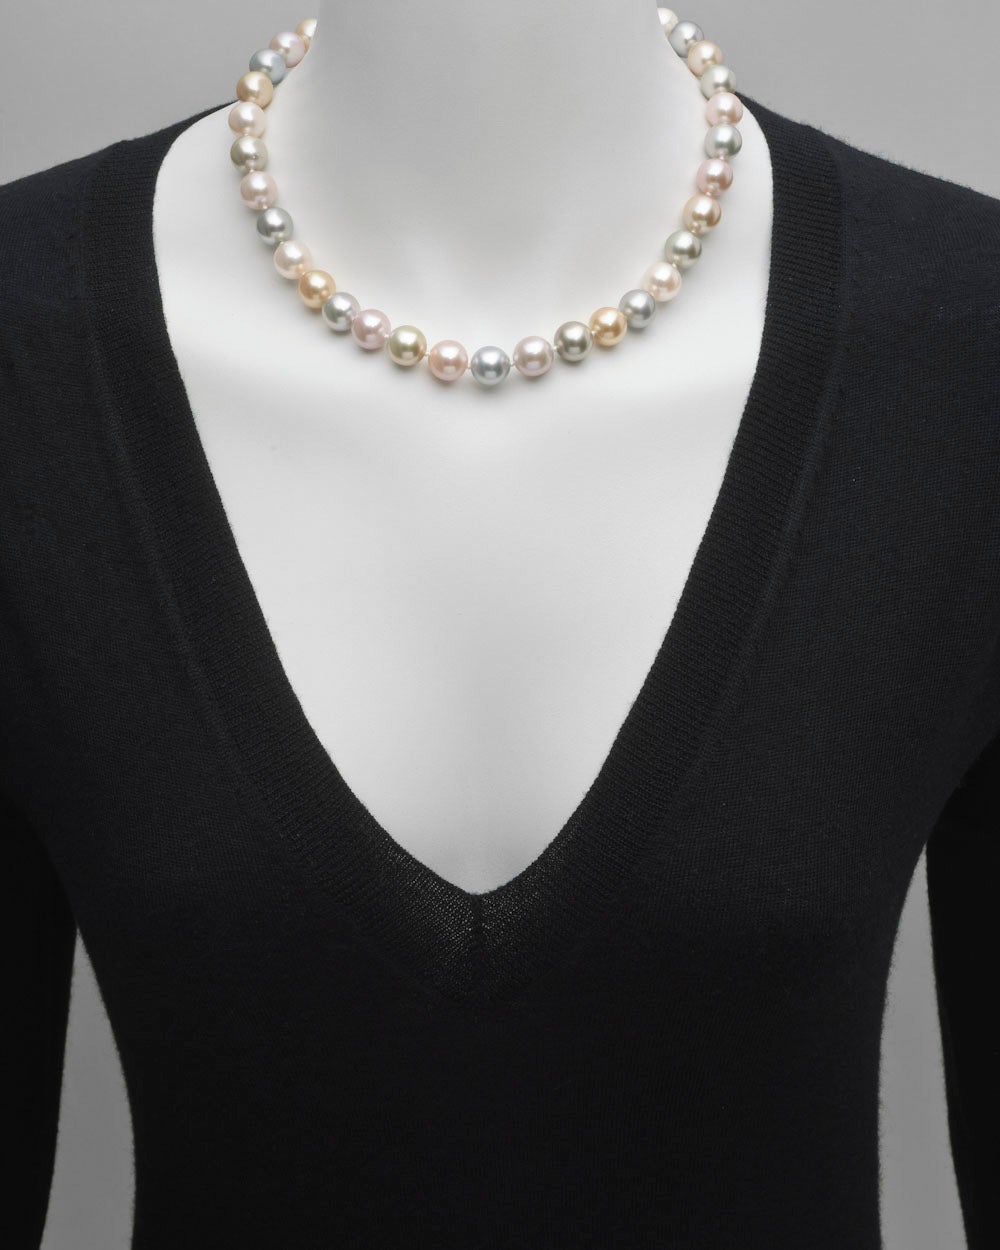 Multicolored Tahitian pearl necklace, composed of 37 pastel colored pearls, ranging from 10 to 11.5mm in diameter, strung on a silk cord, with a pavé diamond ball clasp in 18k white gold. 18